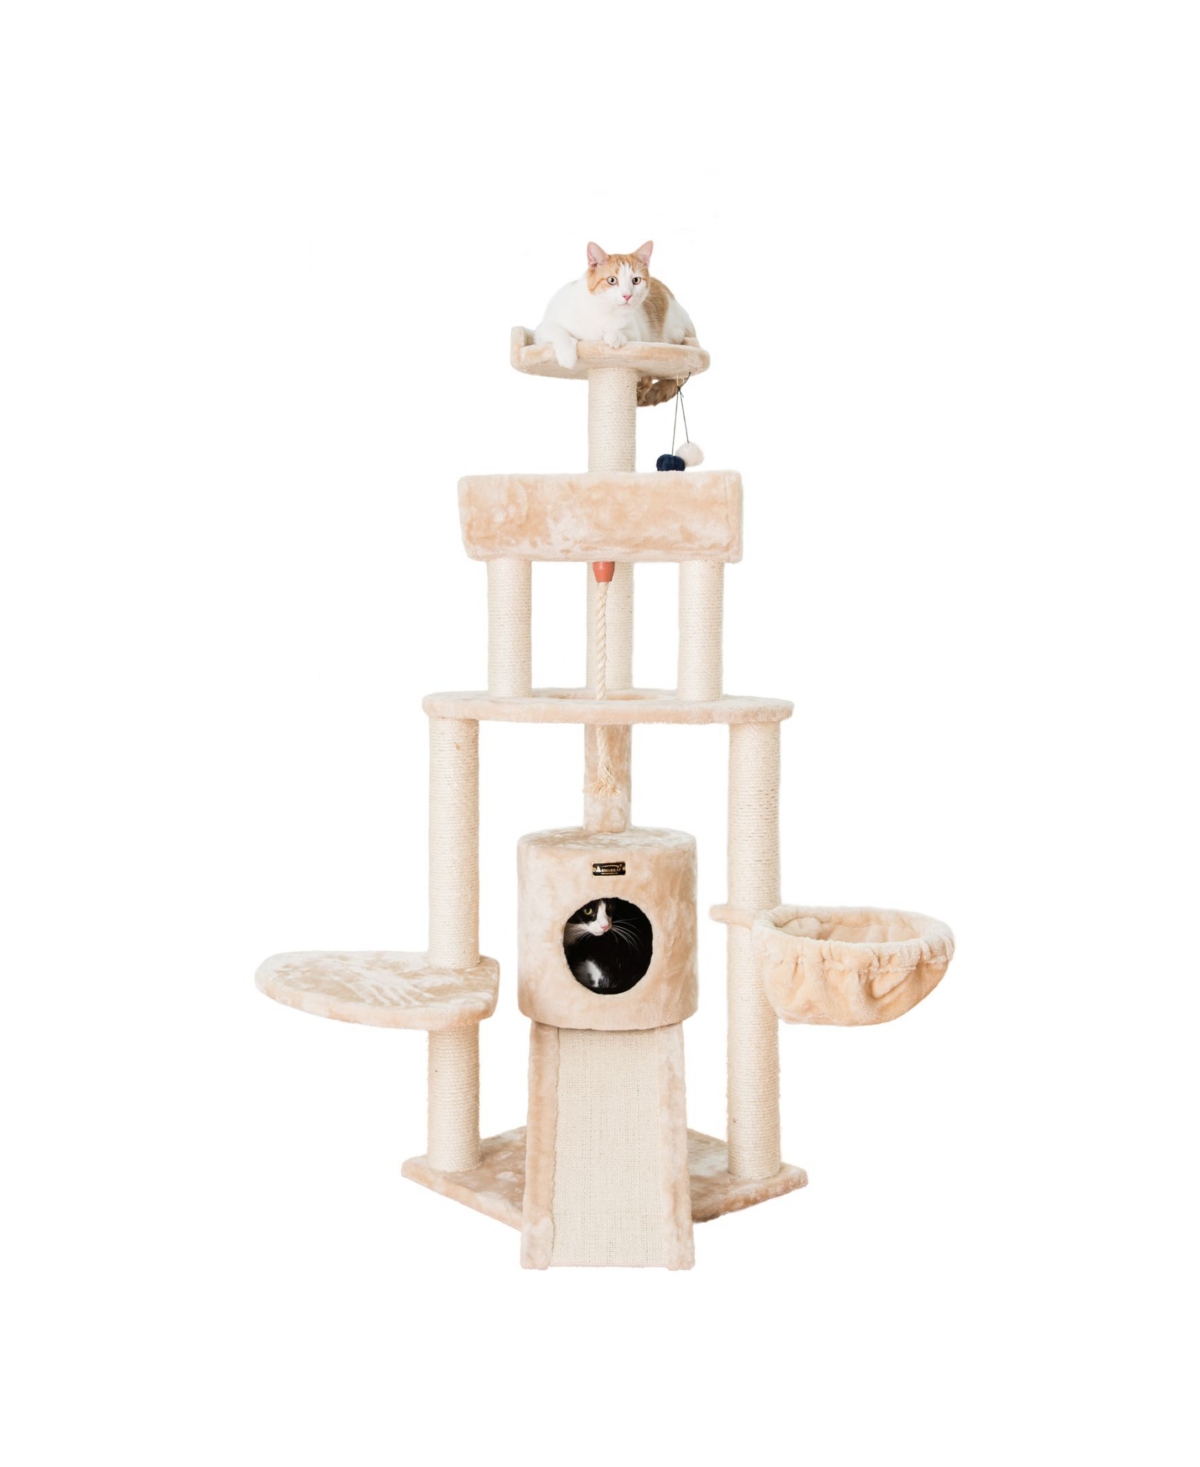 Spacious Faux Fur Real Wood Cat Tower With Basket Lounge, Ramp - Beige